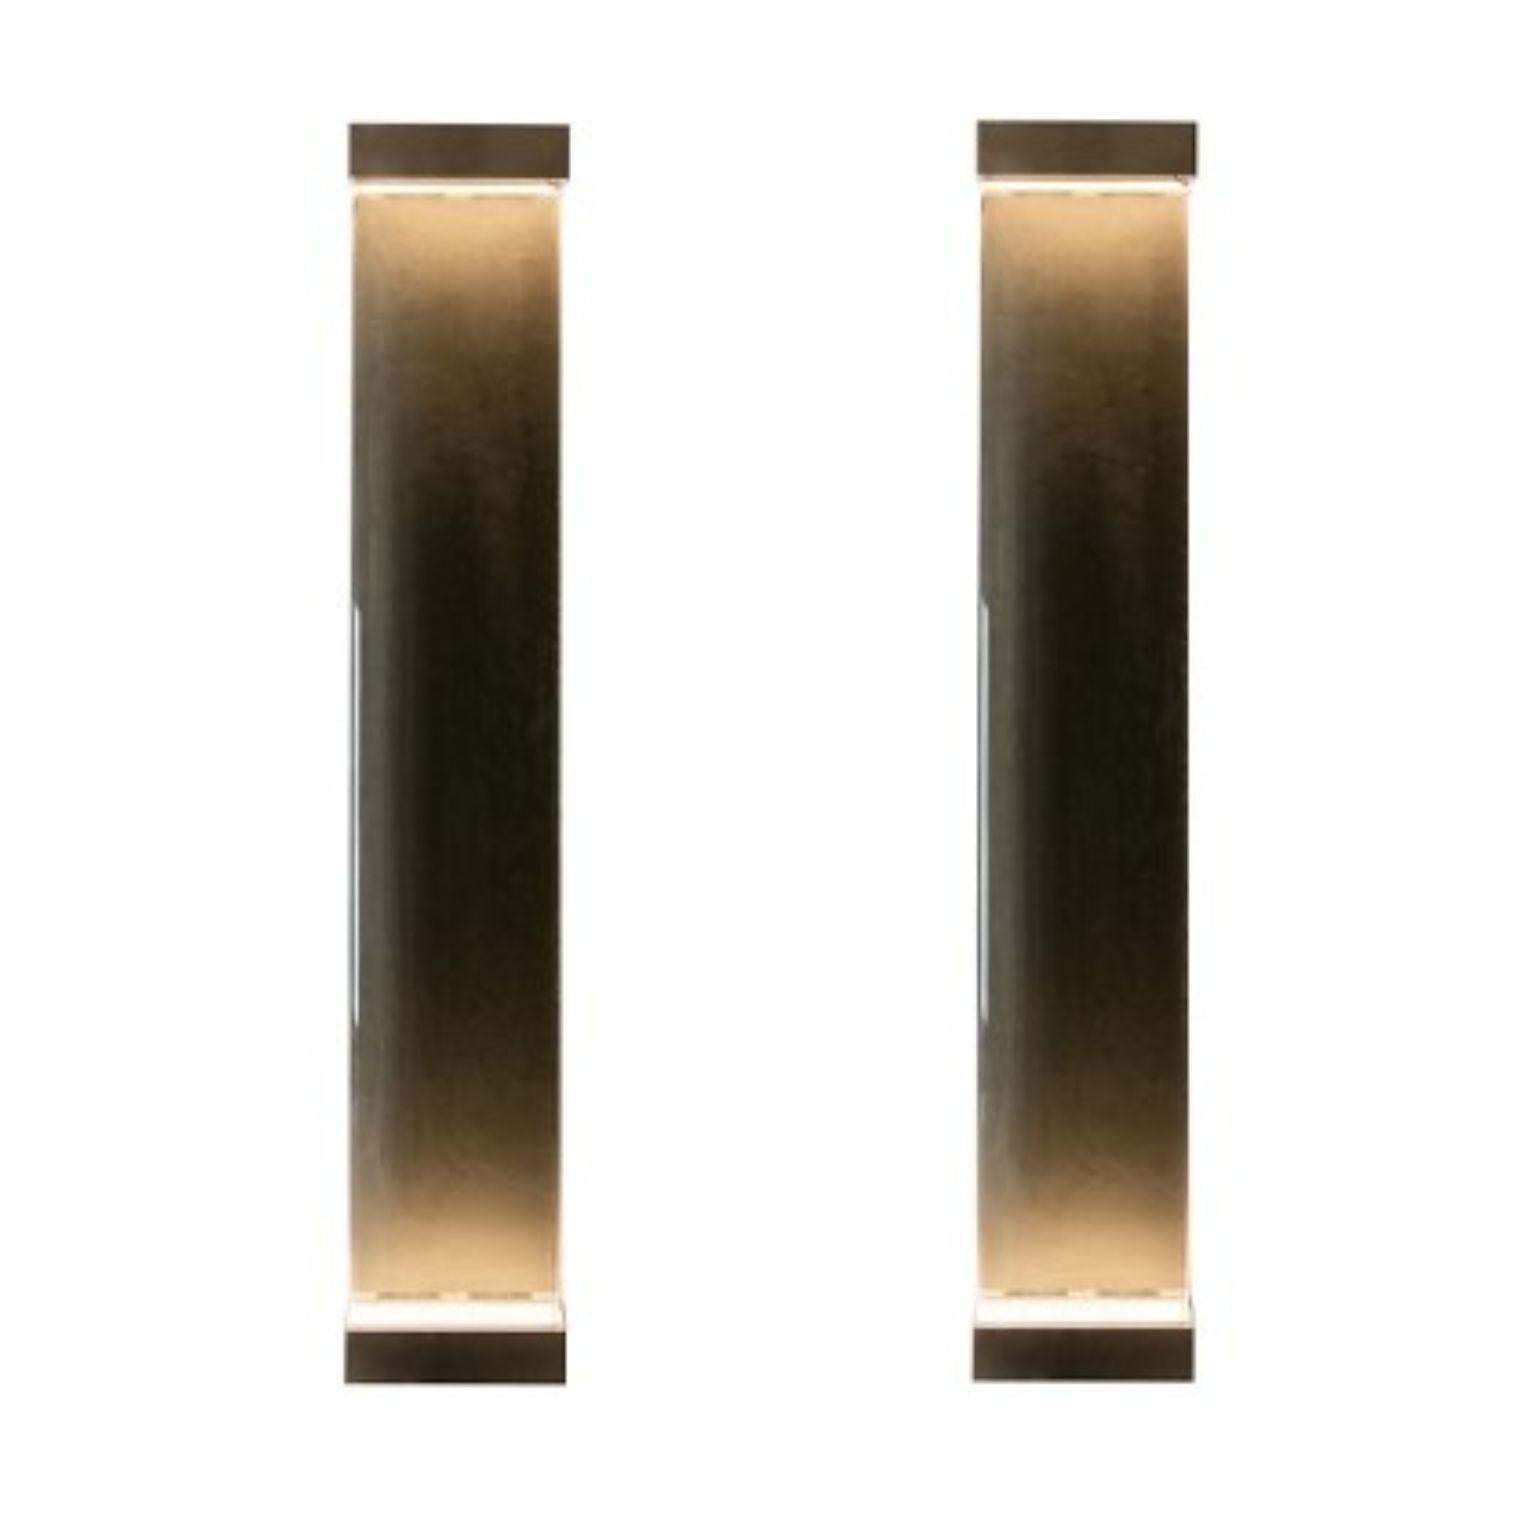 Set of 2 Jud Wall Lamps by Draga & Aurel
Dimensions: W 23, D 10, H 131.
Materials: Resin and brass

All our lamps can be wired according to each country. If sold to the USA it will be wired for the USA for instance.

Inspired by minimalism,